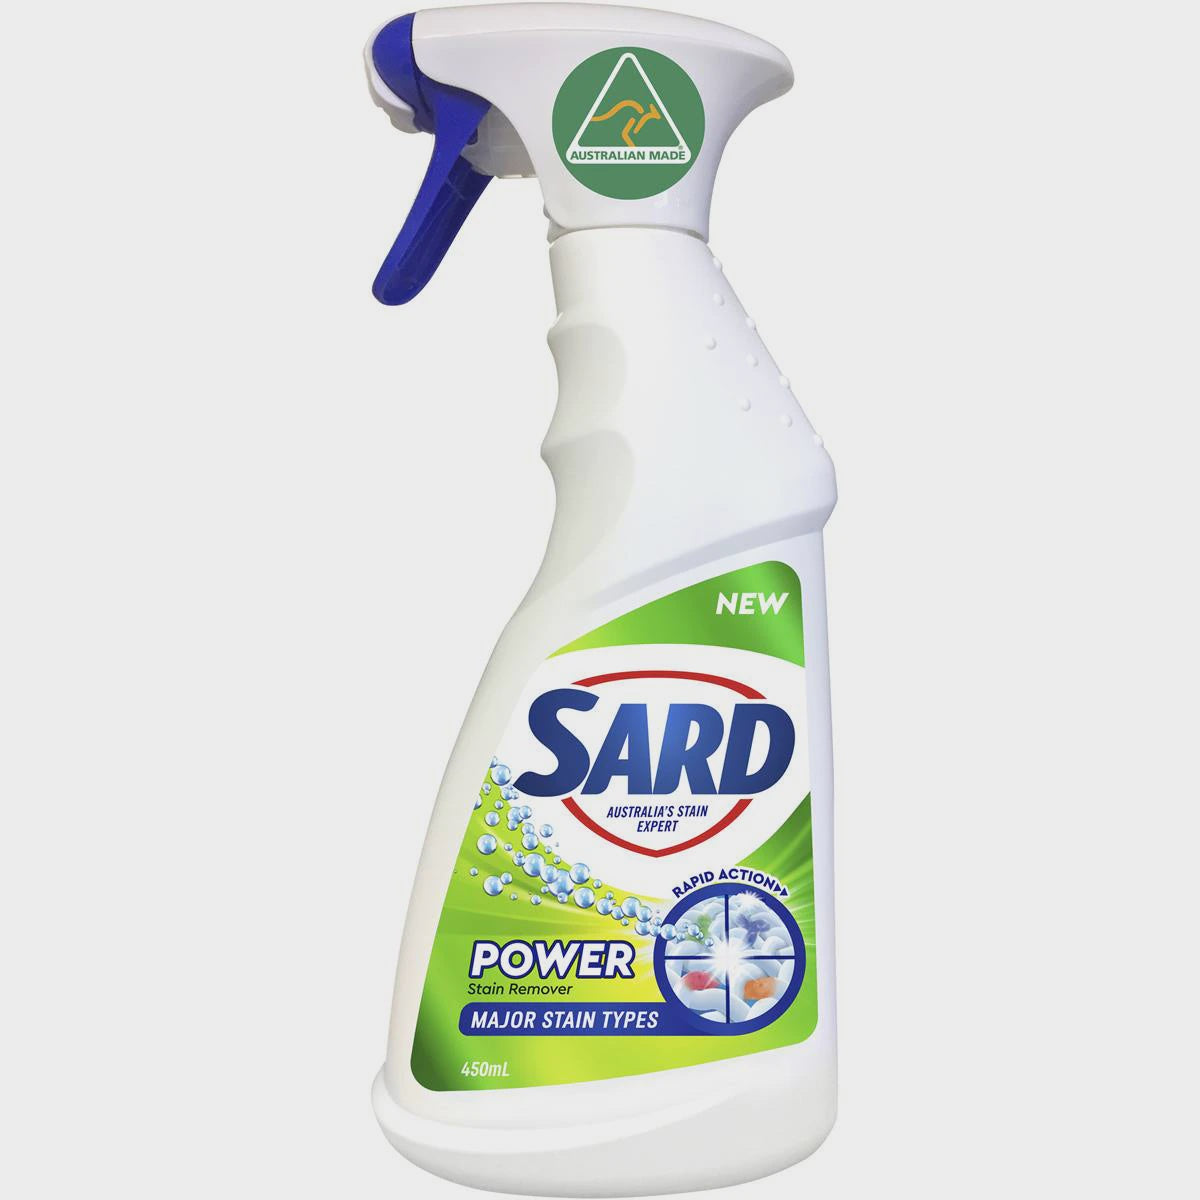 Sard Power Stain Remover Remover Spray 450ml